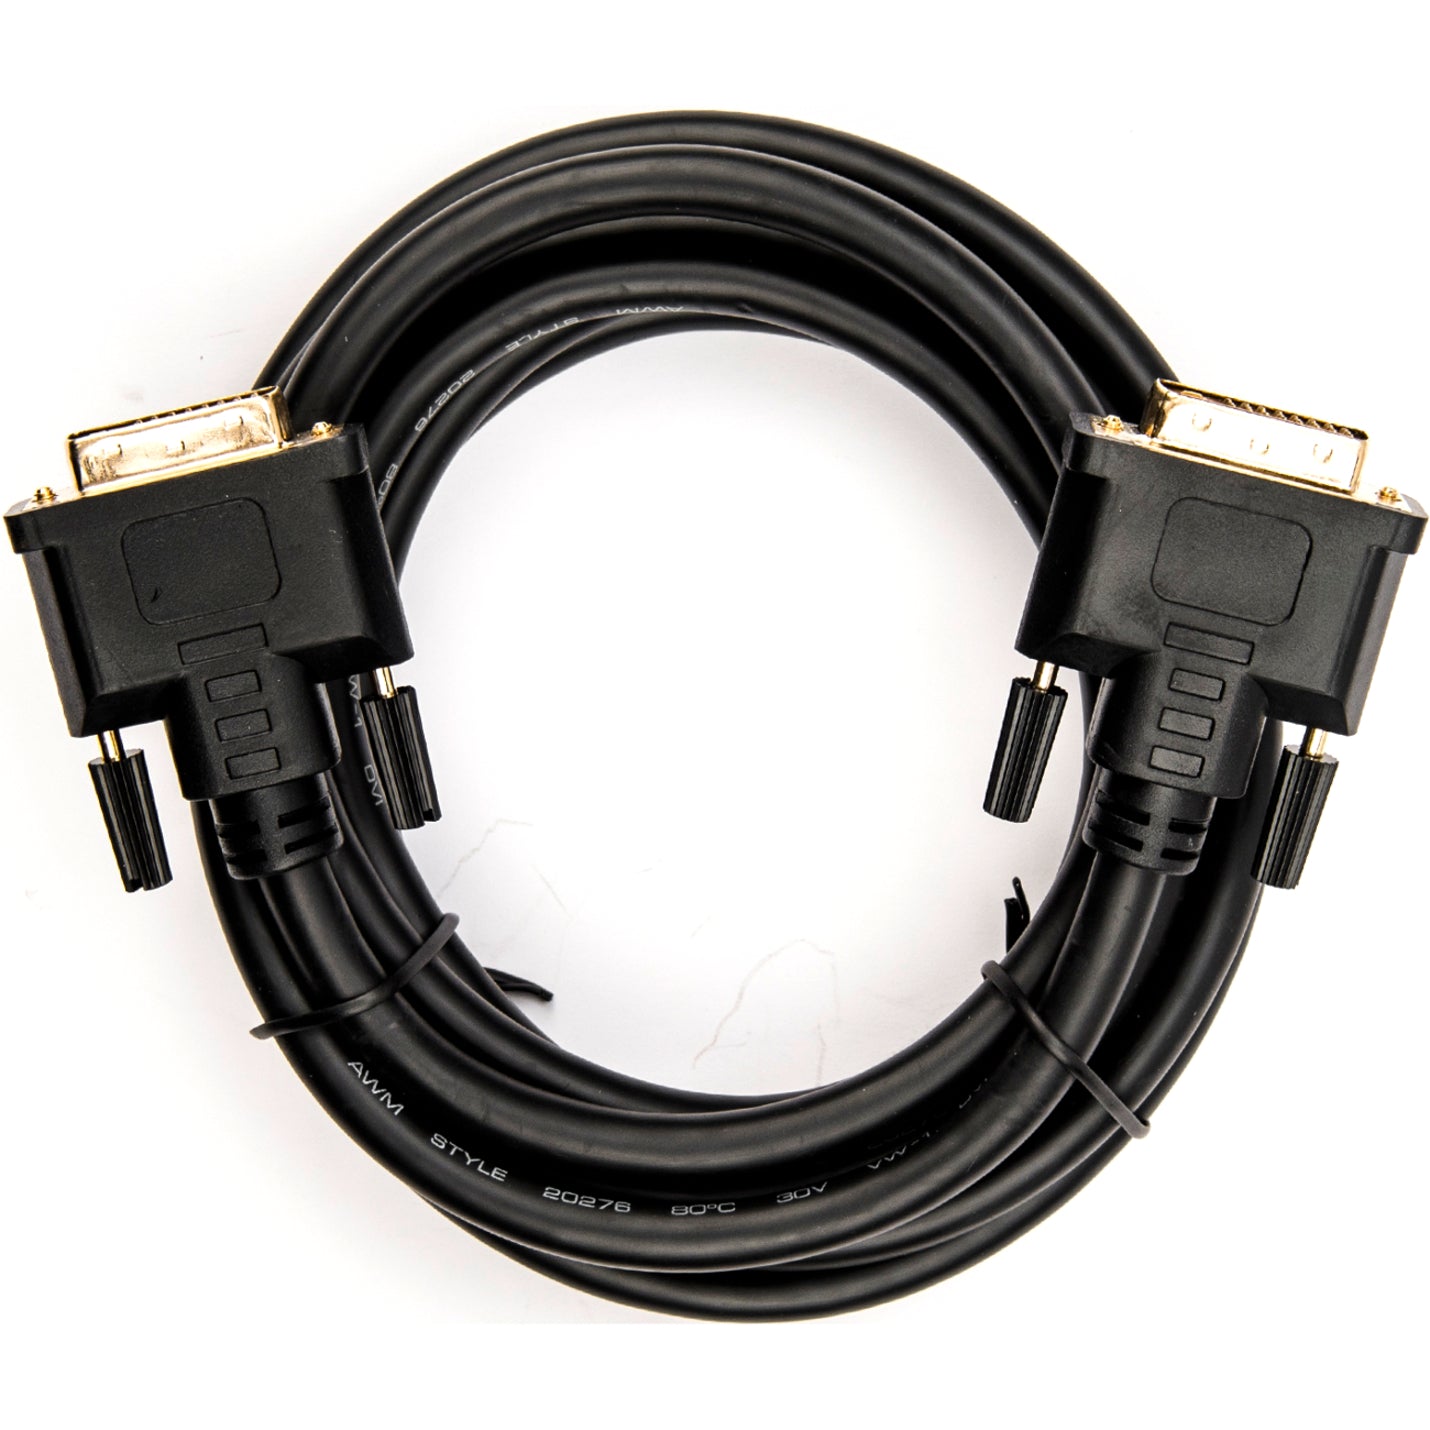 Rocstor Y10C245-B1 DVI-D Dual Link Display Cable (m/m), 10 ft, Corrosion Resistant, Strain Relief, Molded